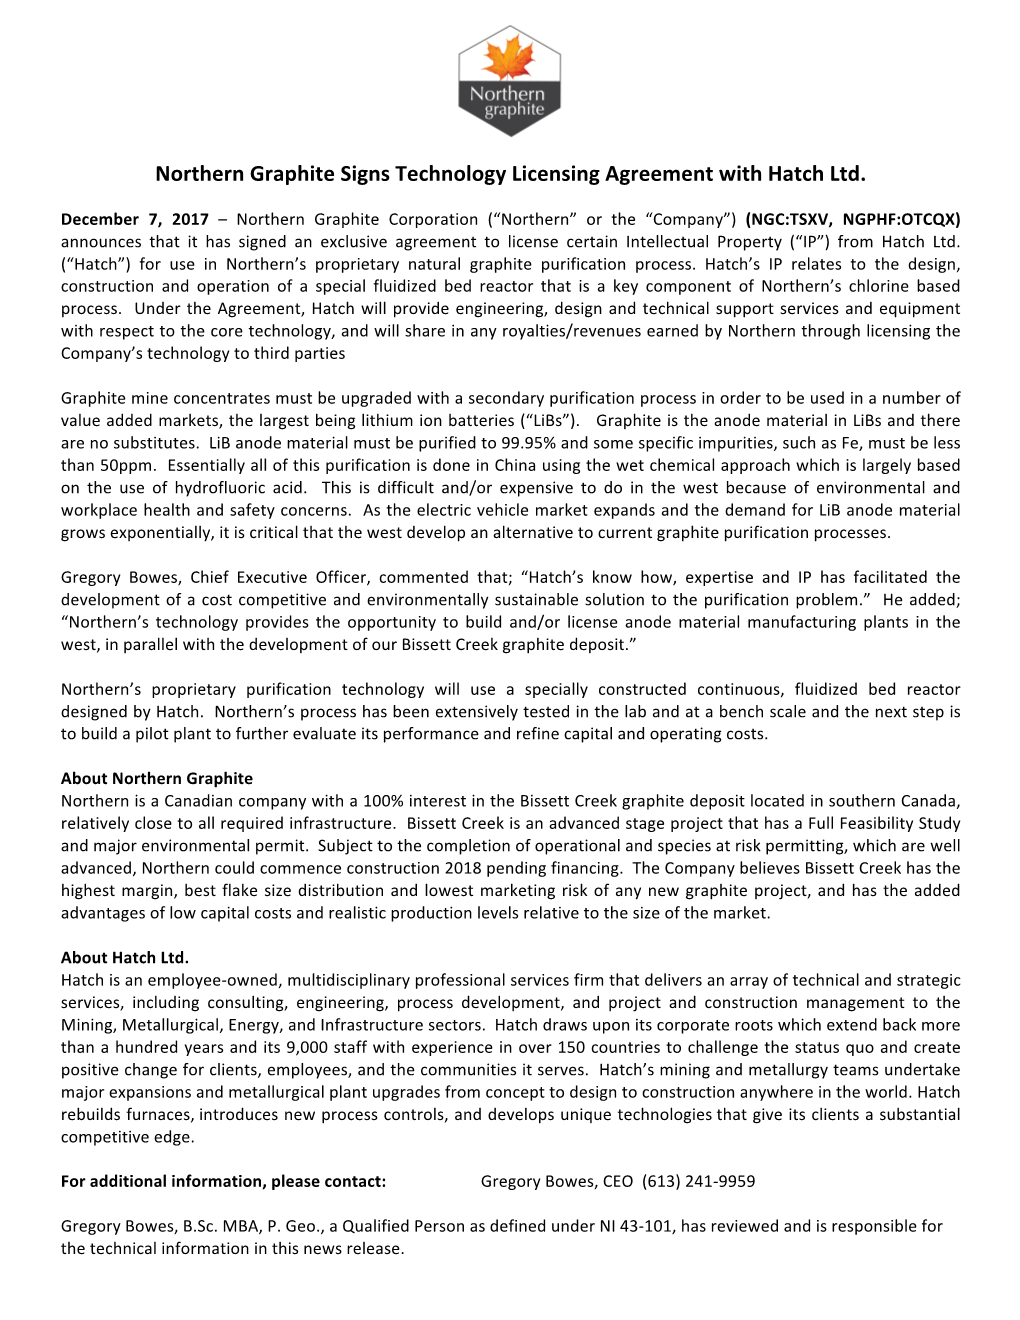 Northern Signs Exclusive Licensing Agreement with Hatch Ltd